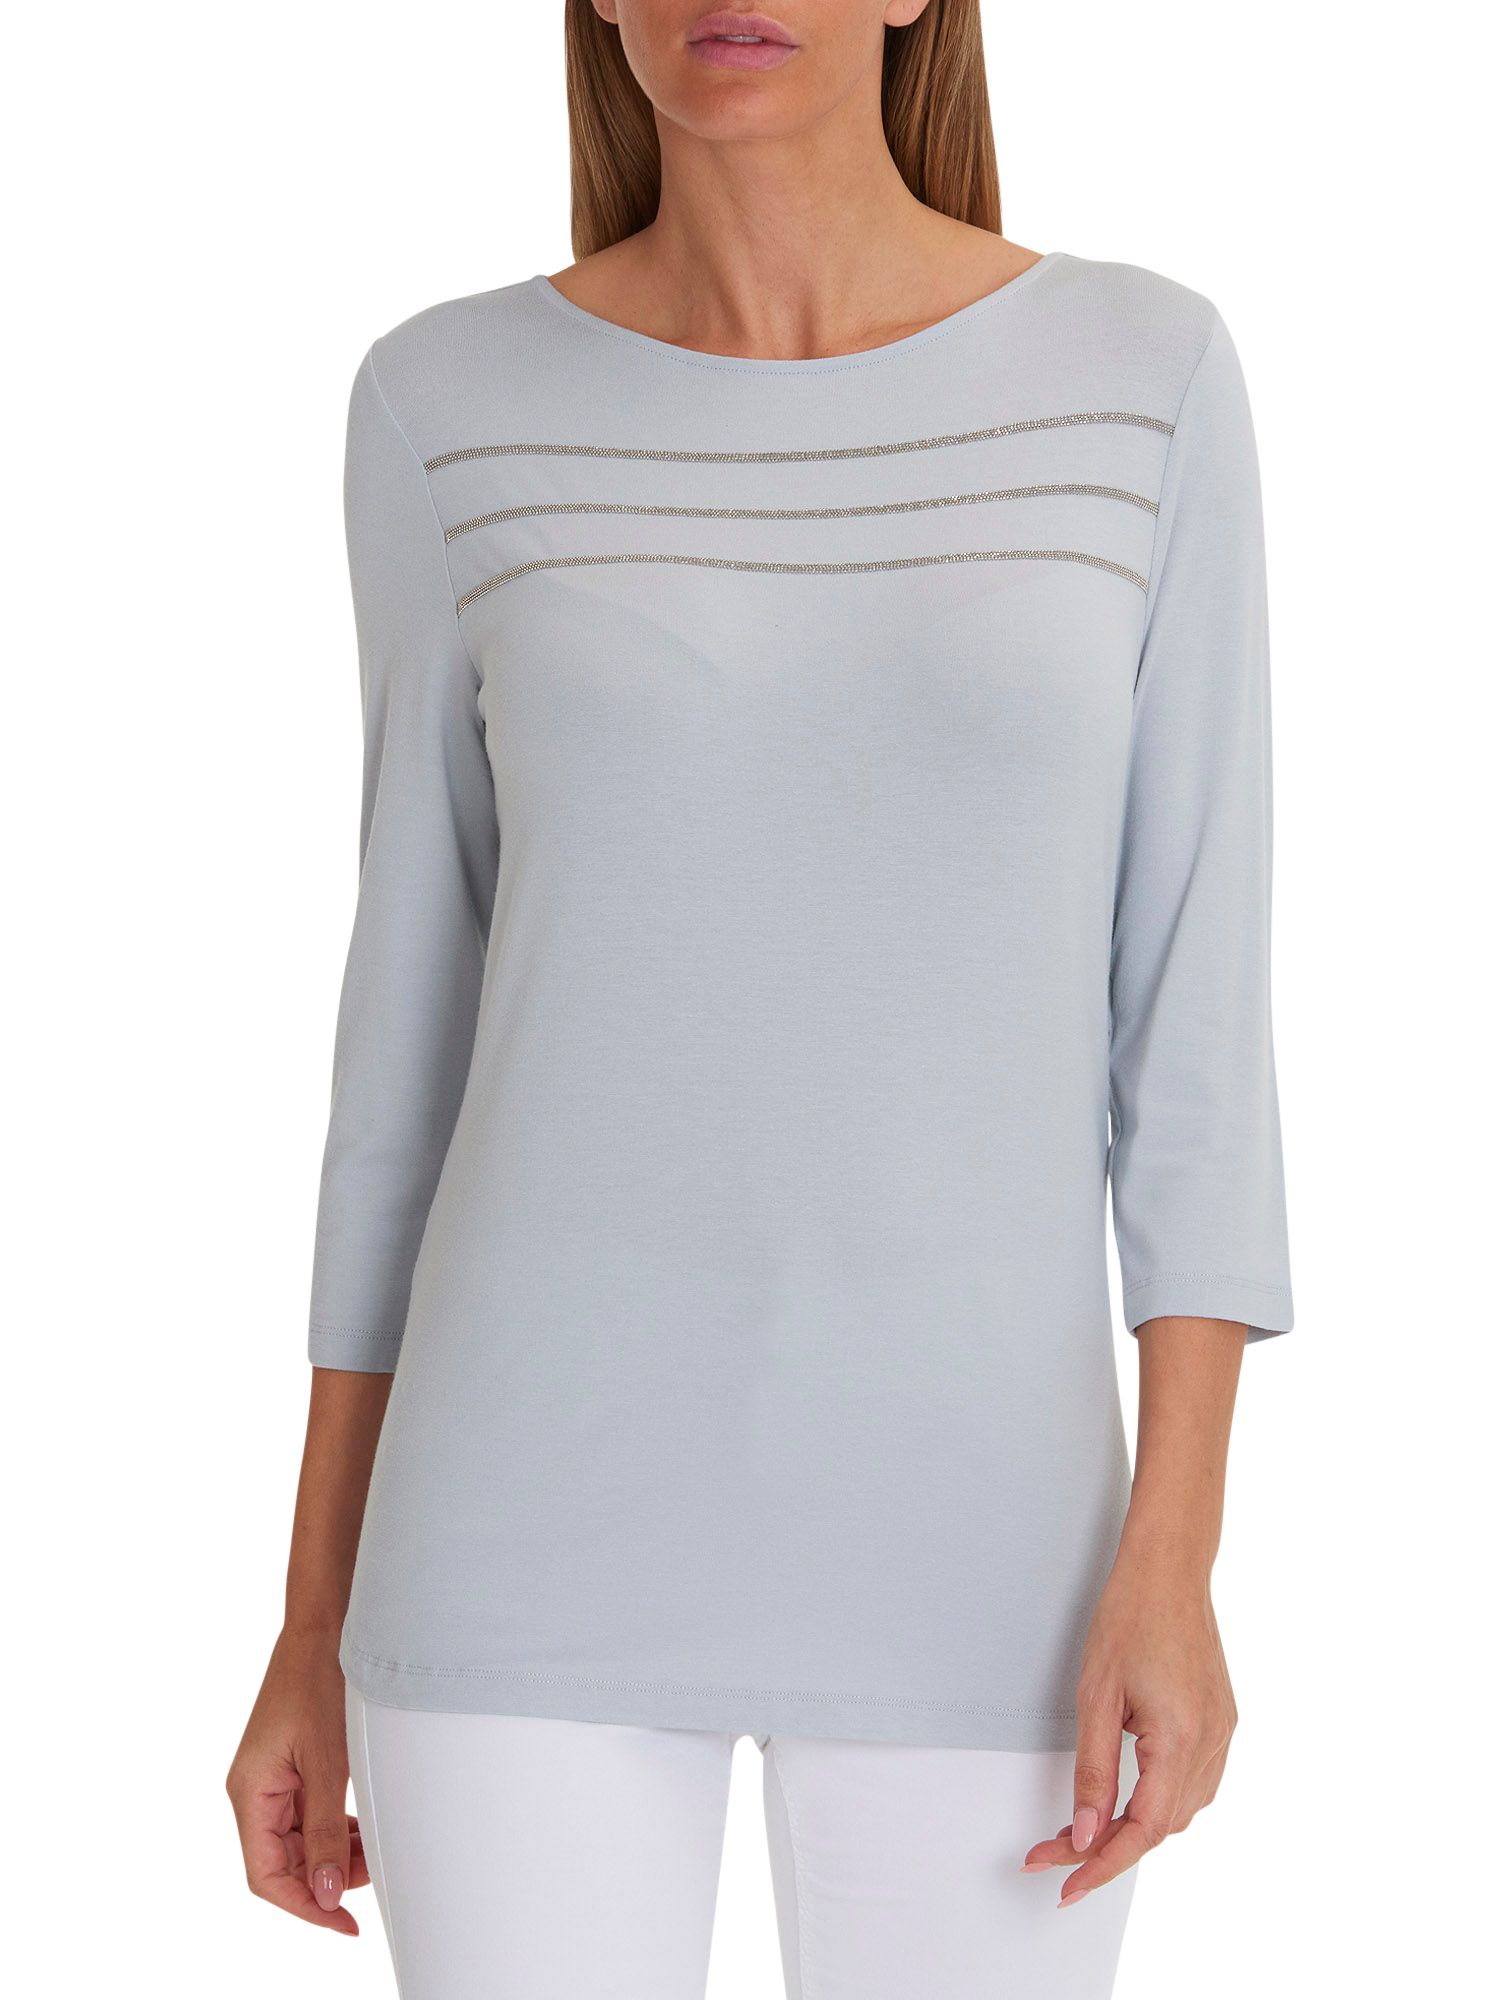 Betty Barclay Embellished T-Shirt at John Lewis & Partners